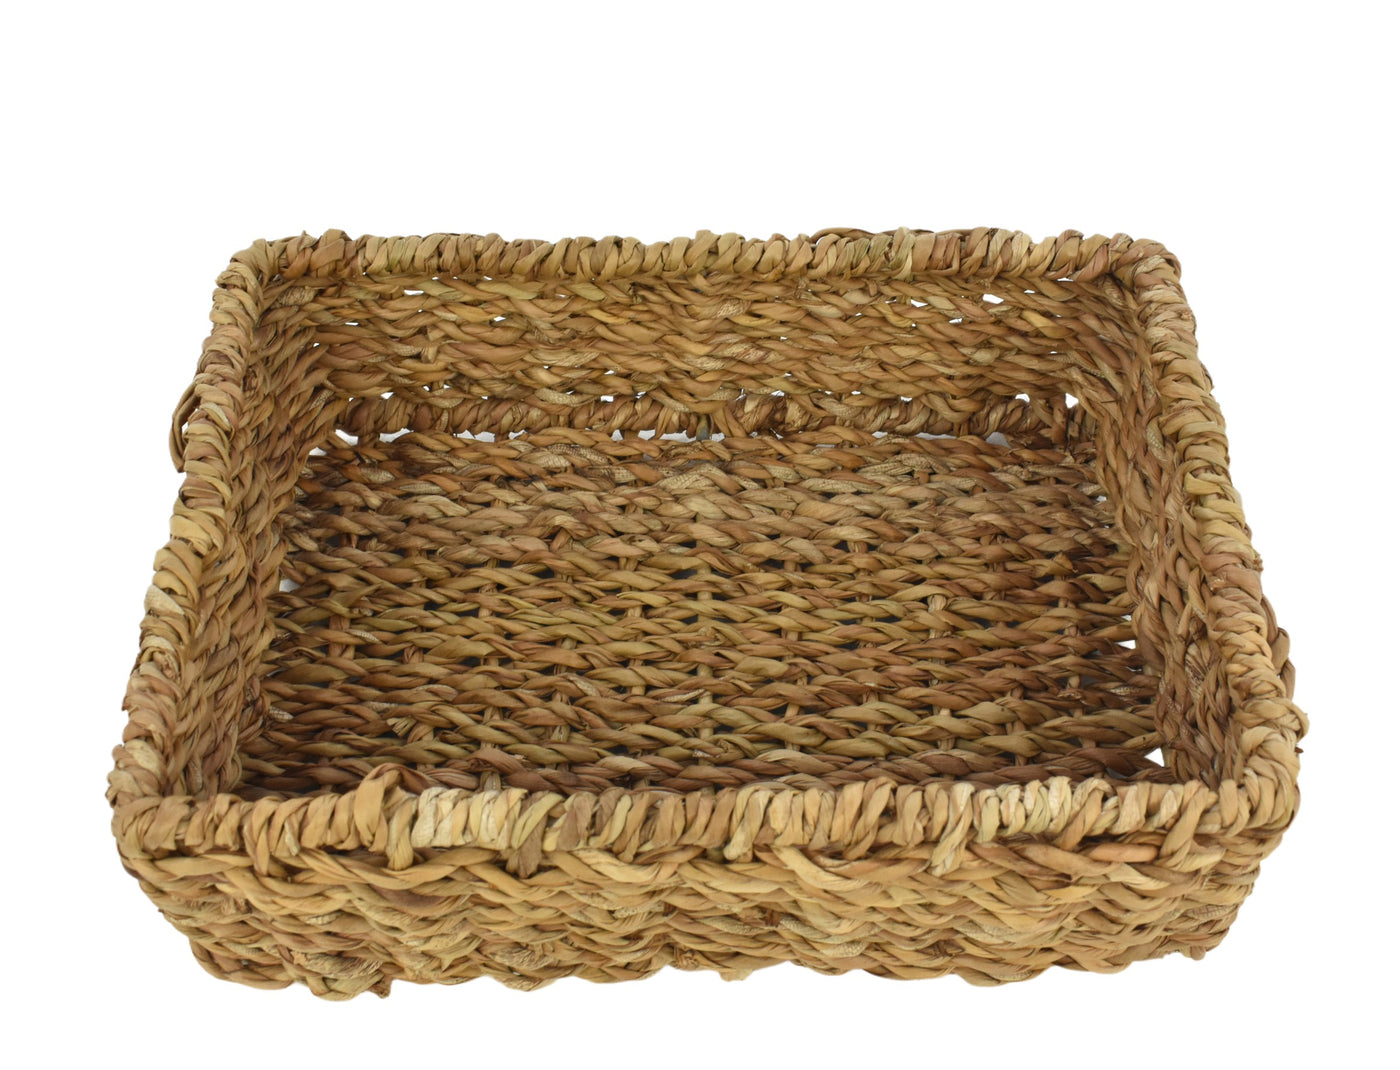 Shallow Seagrass Basket S